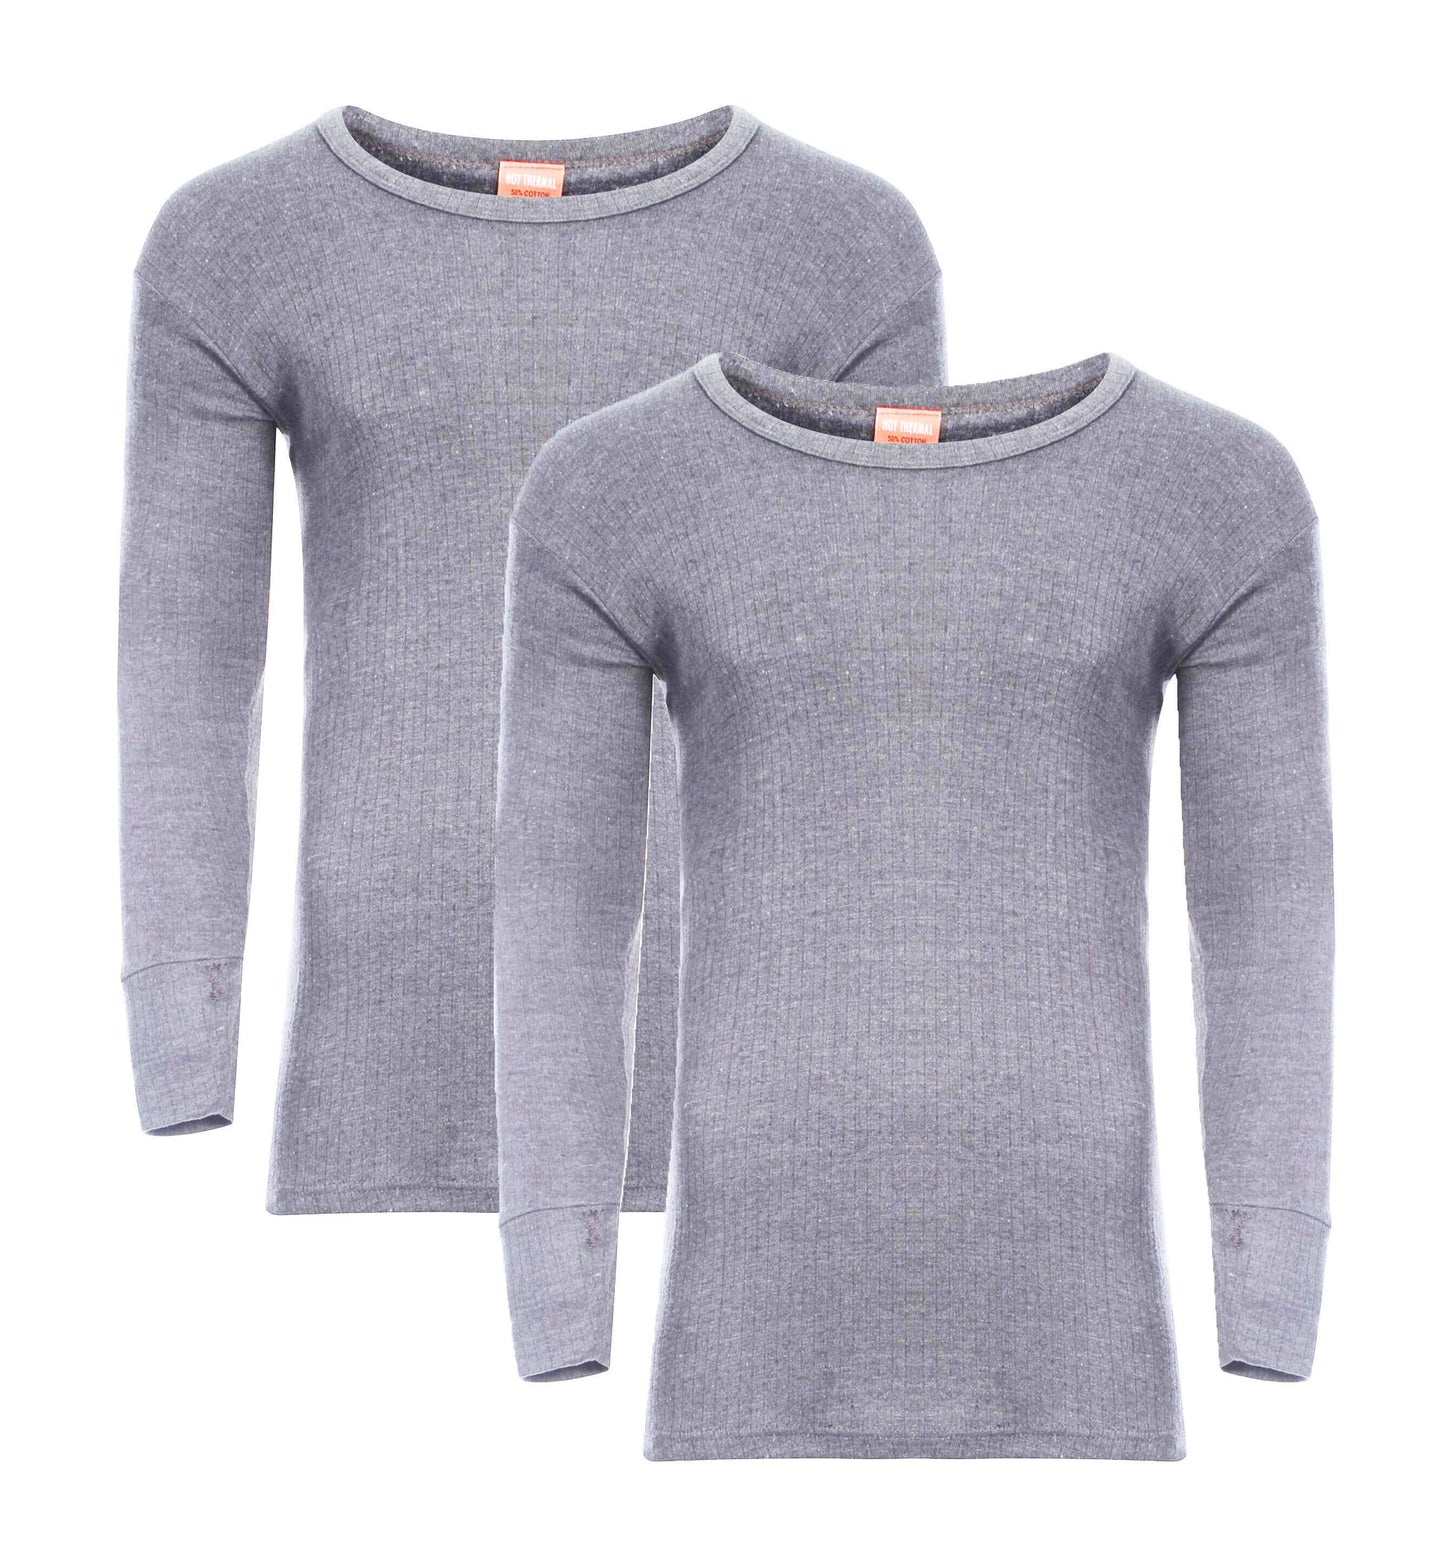 Heatwave® Pack Of 2 Men's Thermal Long Sleeve Top, Warm Underwear Baselayer. Buy now for £12.00. A Thermal Underwear by Heatwave Thermalwear. baselayer, black, blue, charcoal, grey, heatwave, hiking, large, long johns, long sleeve, marl grey, medium, mens